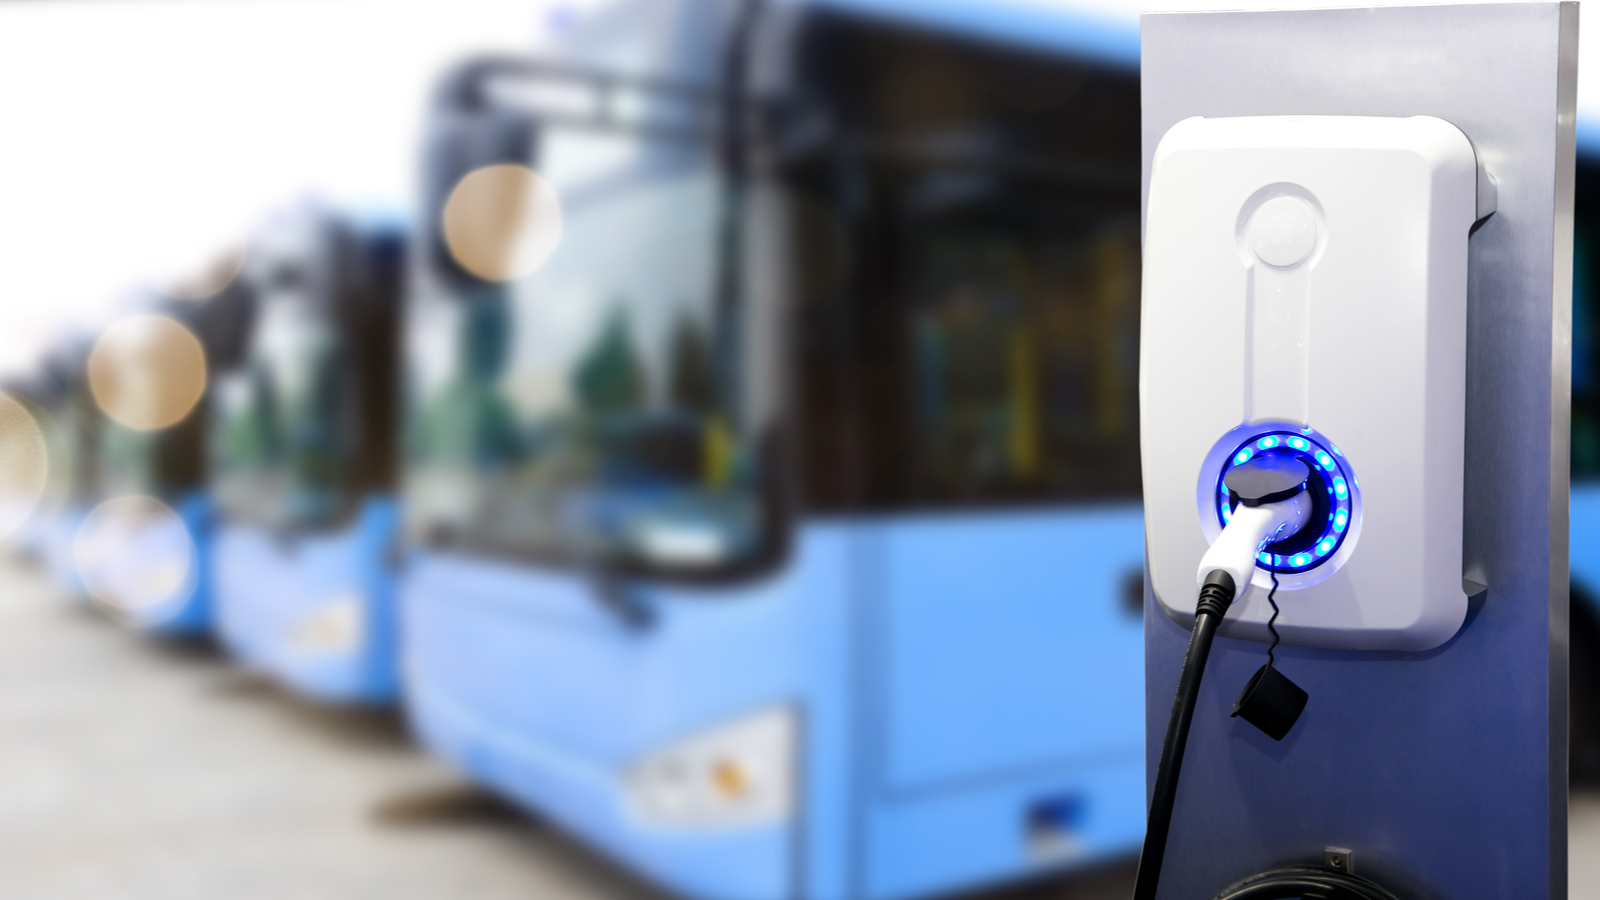 An electric vehicle charger is seen next to a row of blue electric buses representing ARVL stock.